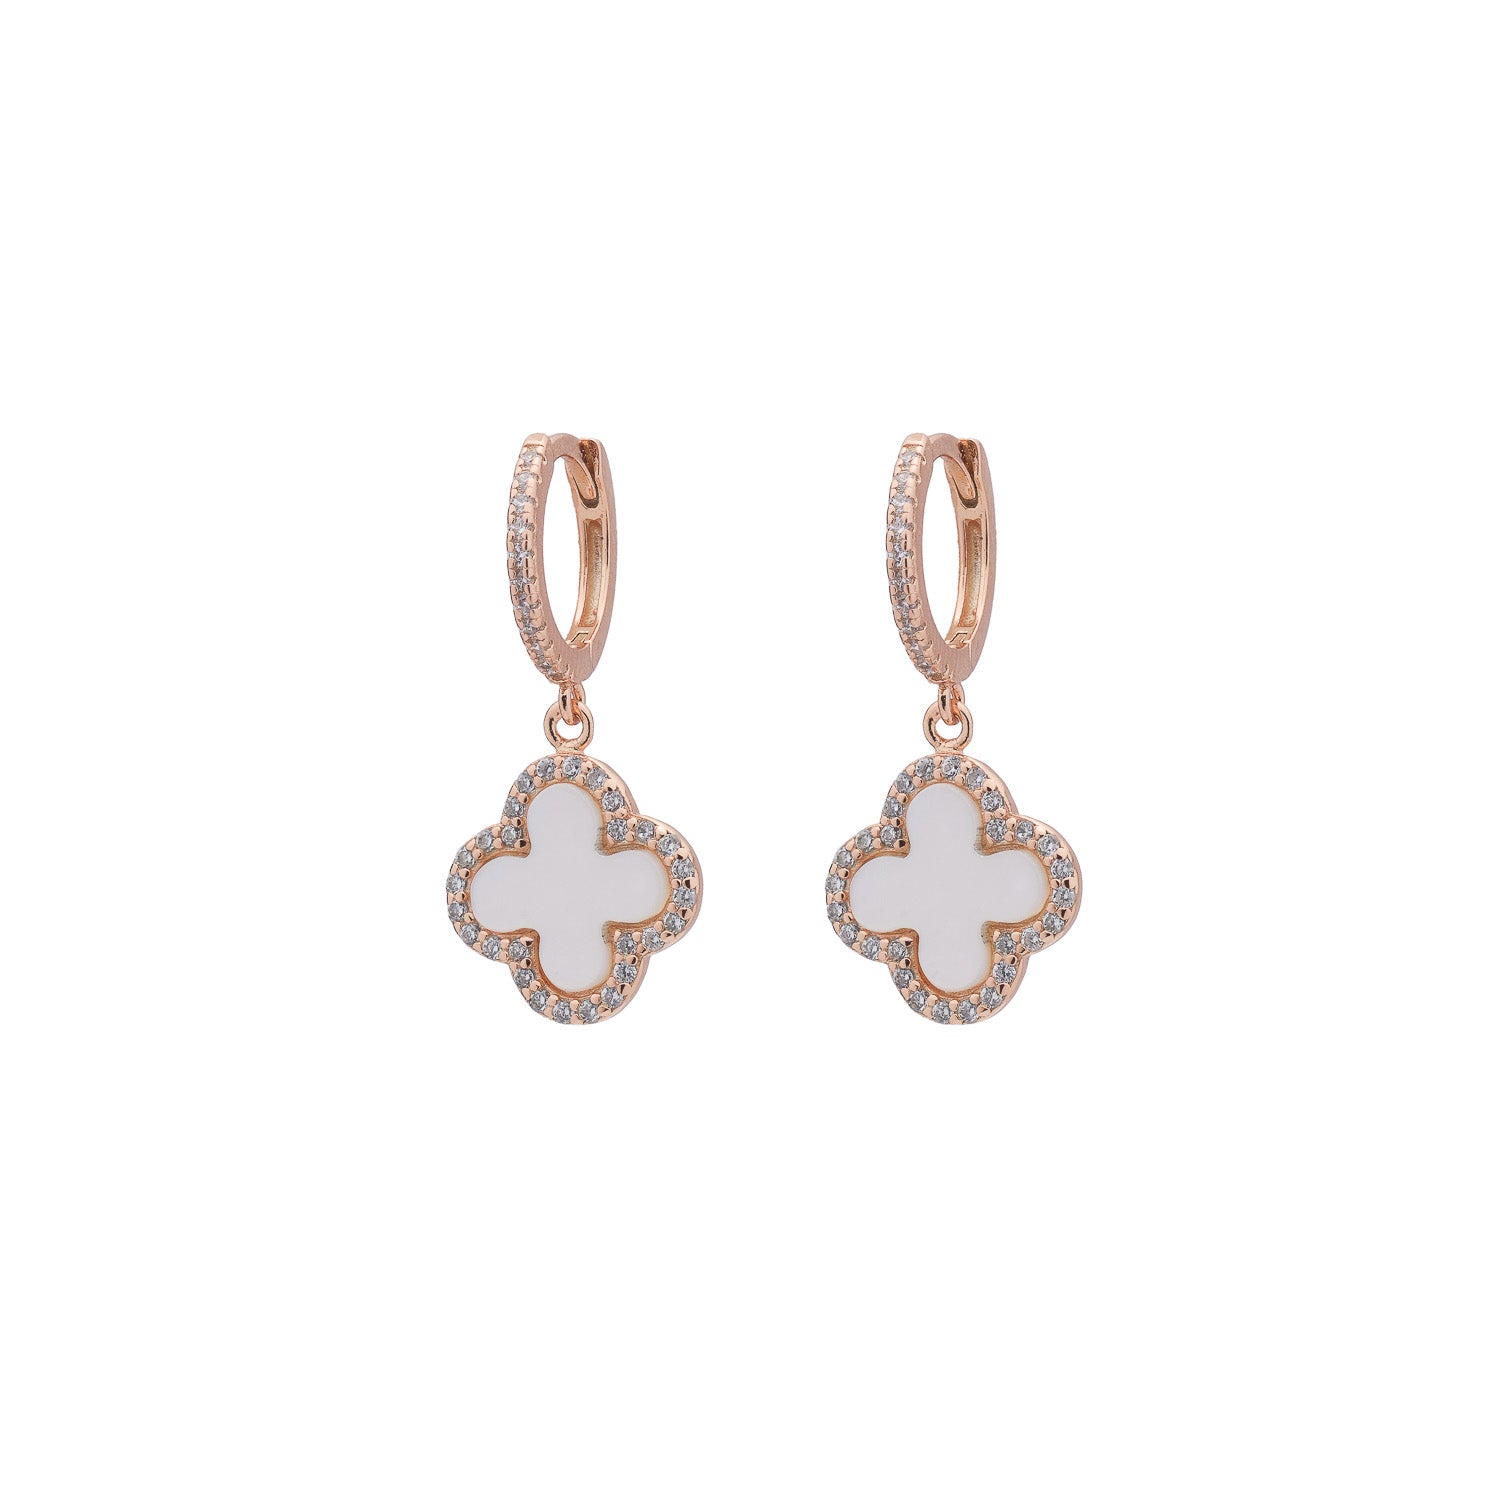 Clover Hoop Earrings with Mother of Pearl (Rose Gold) (Large)